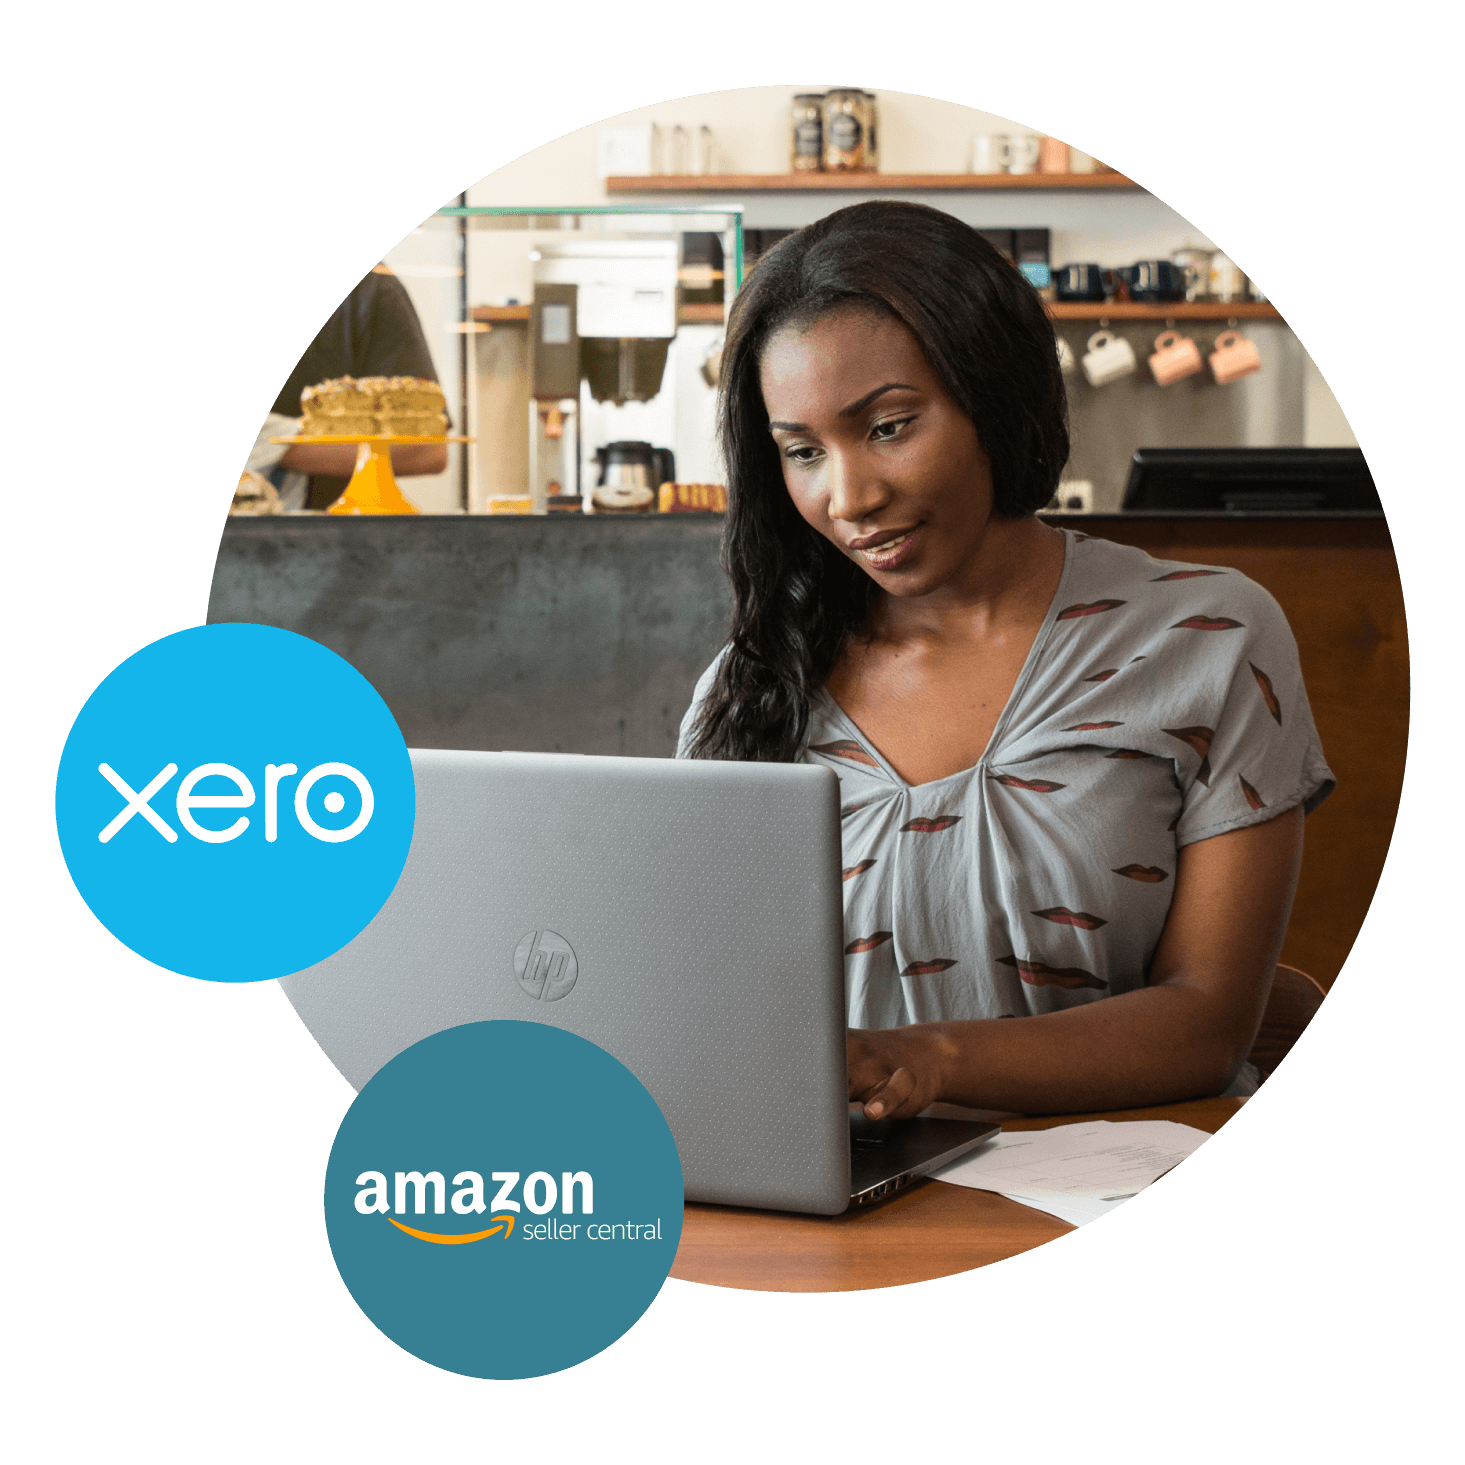 An Amazon seller uses Xero’s analytics tools on their laptop for bookkeeping and managing cash flow.